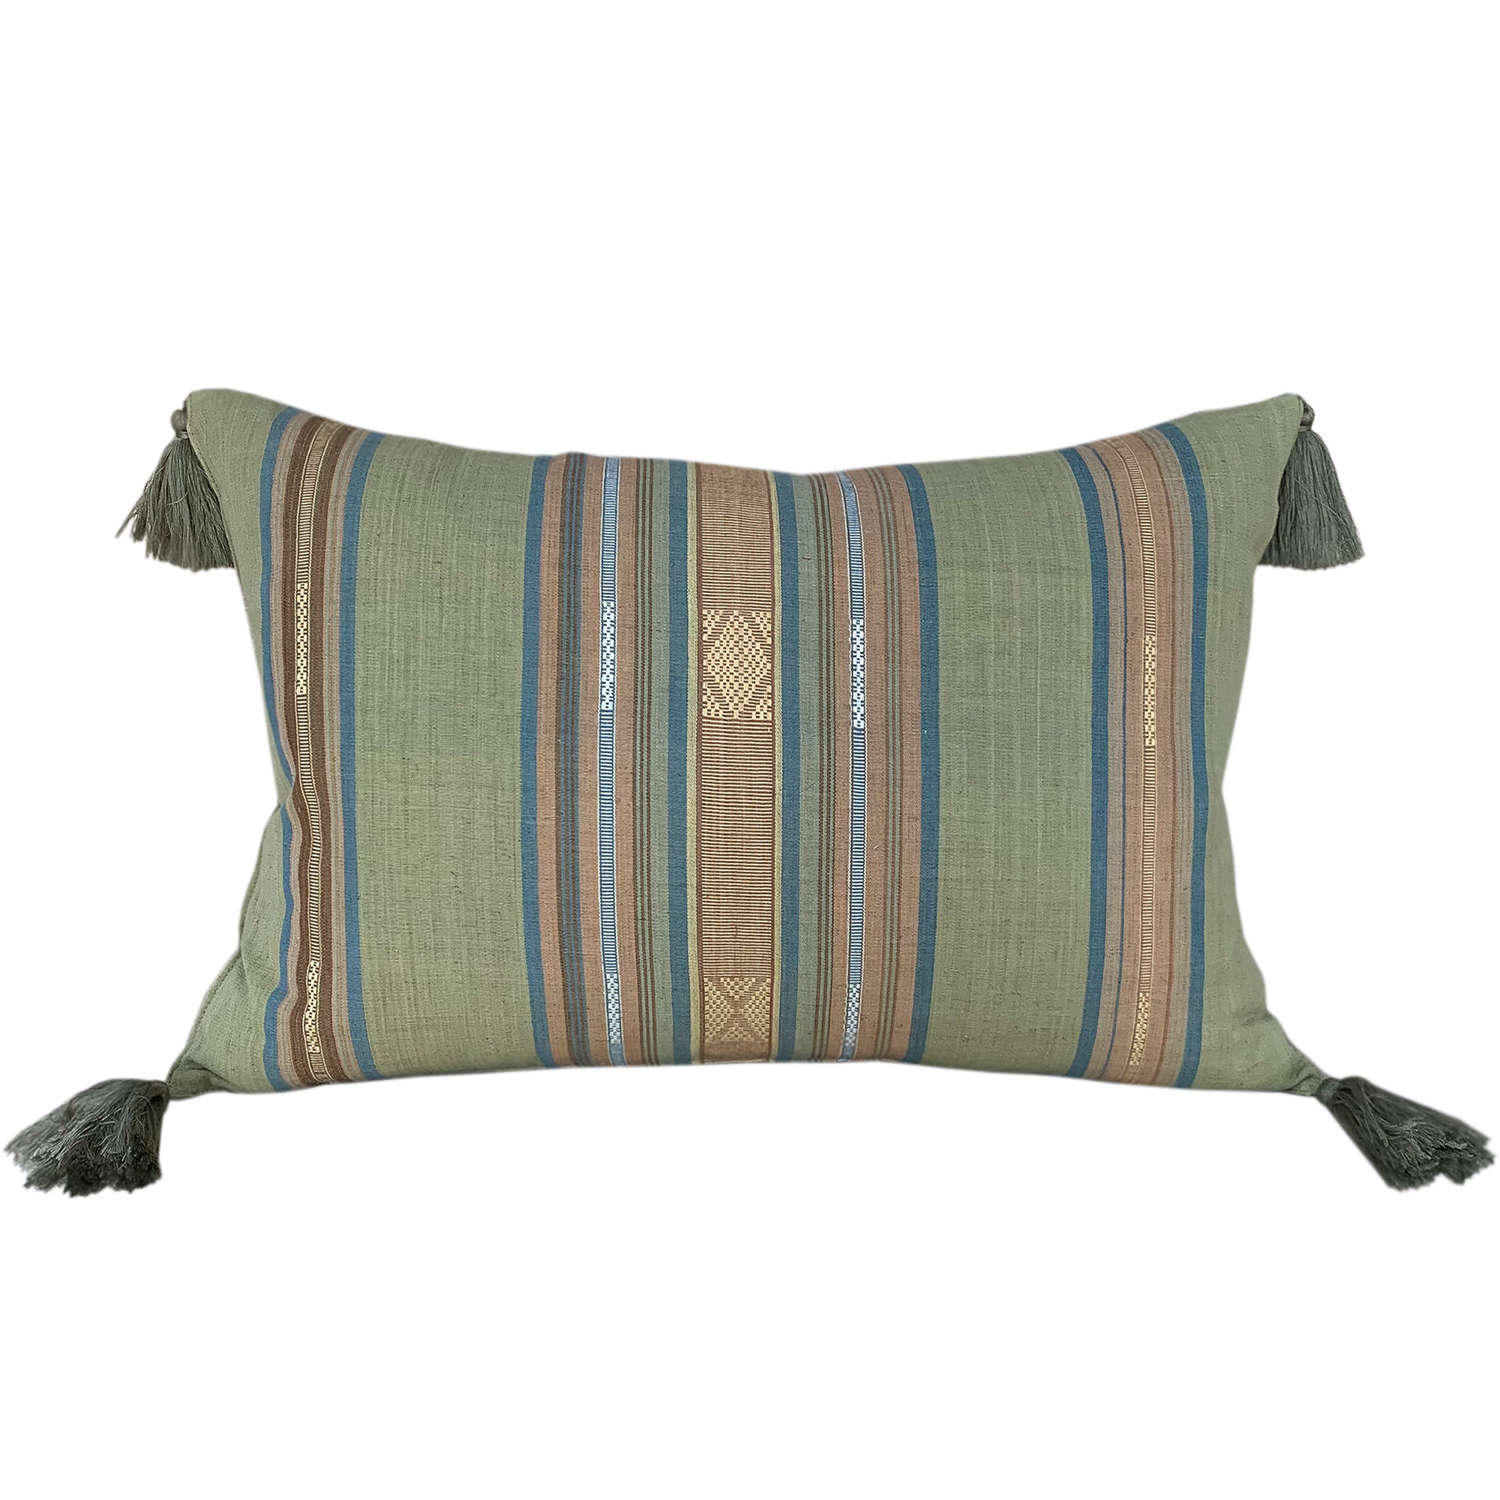 Green Lombok cushions with tassels